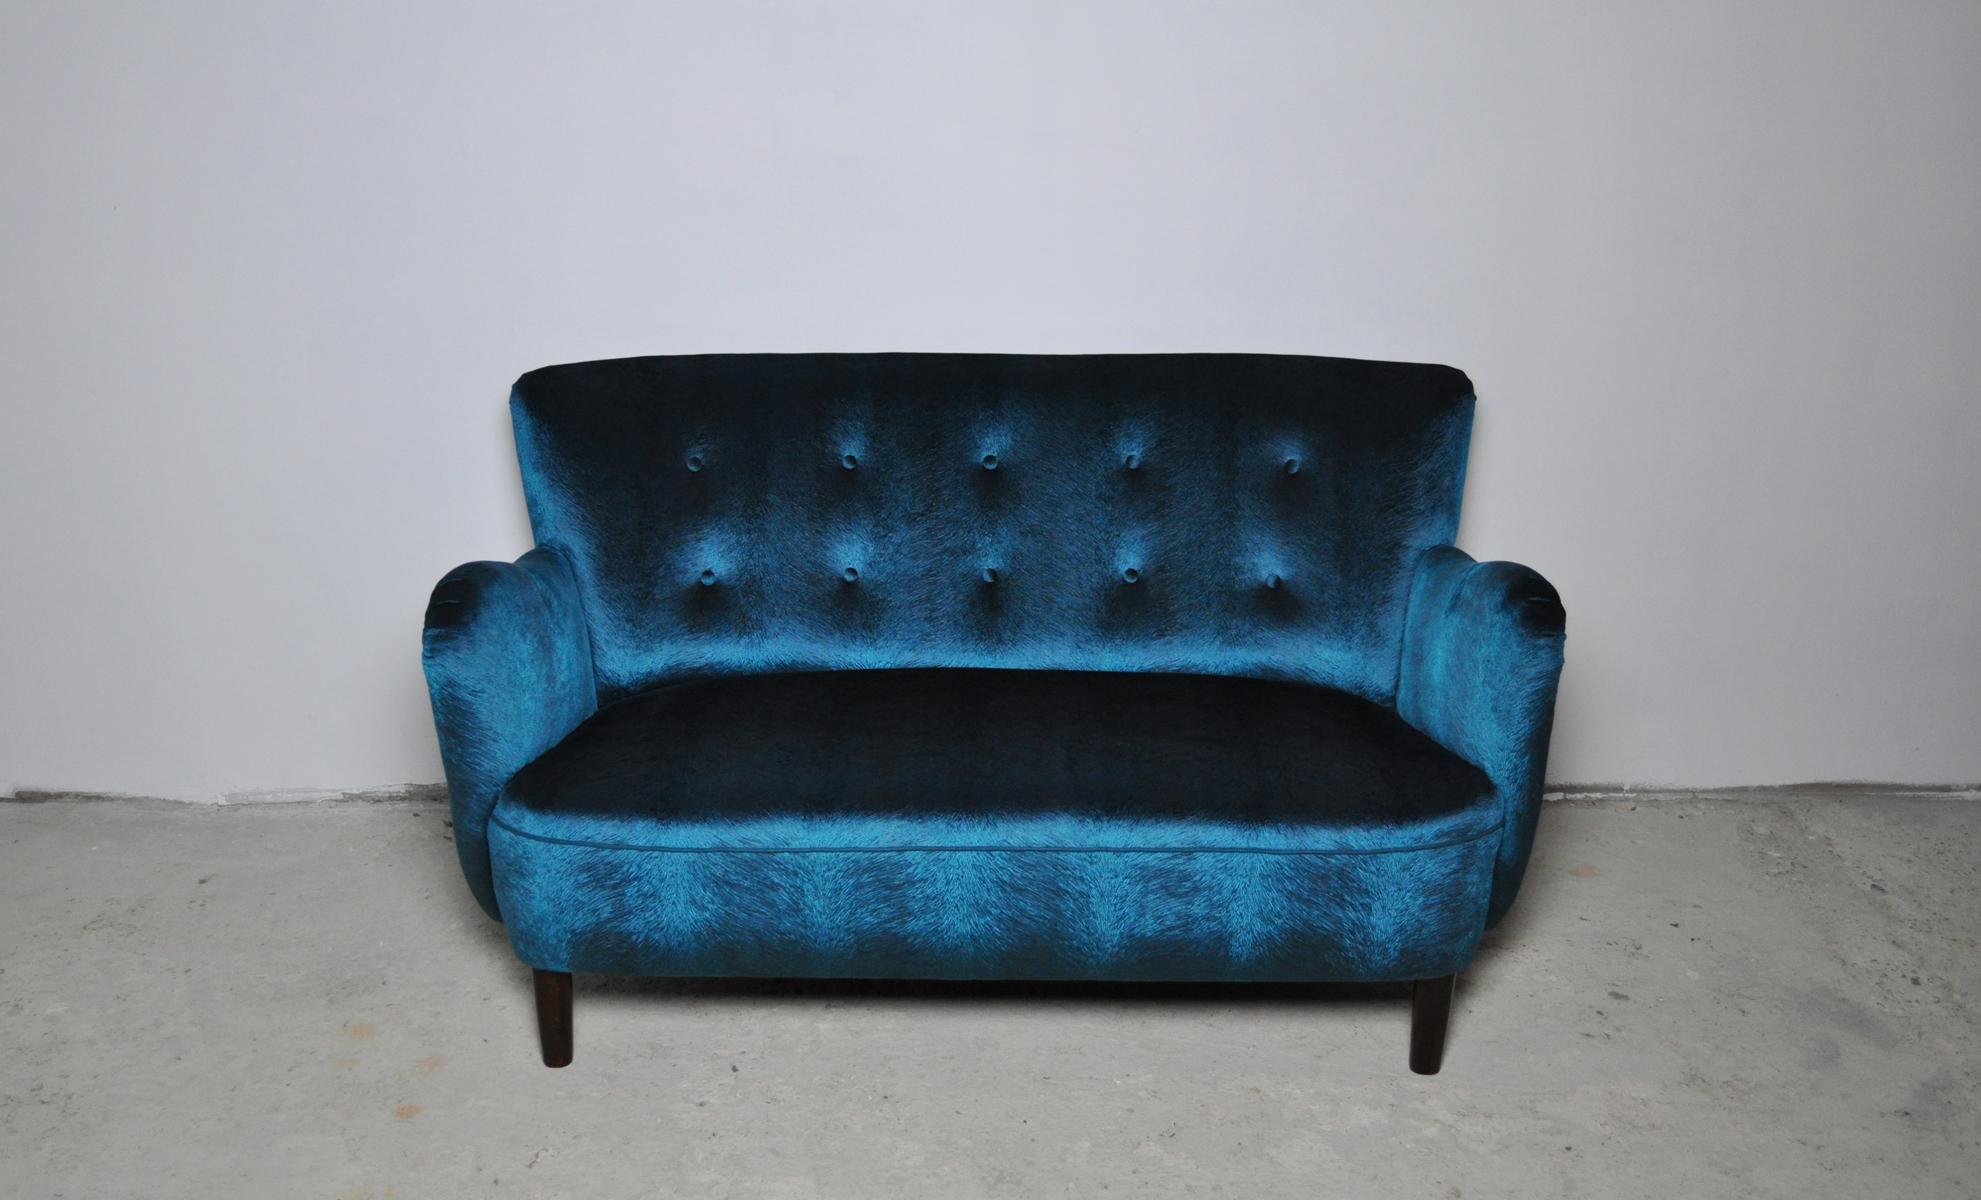 Elegant early midcentury curved sofa with peacock blue velvet new upholstery.

Very good condition. 

Dimensions: 
Height 76 cm
Length 137 cm
Depth 75 cm
Seat height 43 cm.